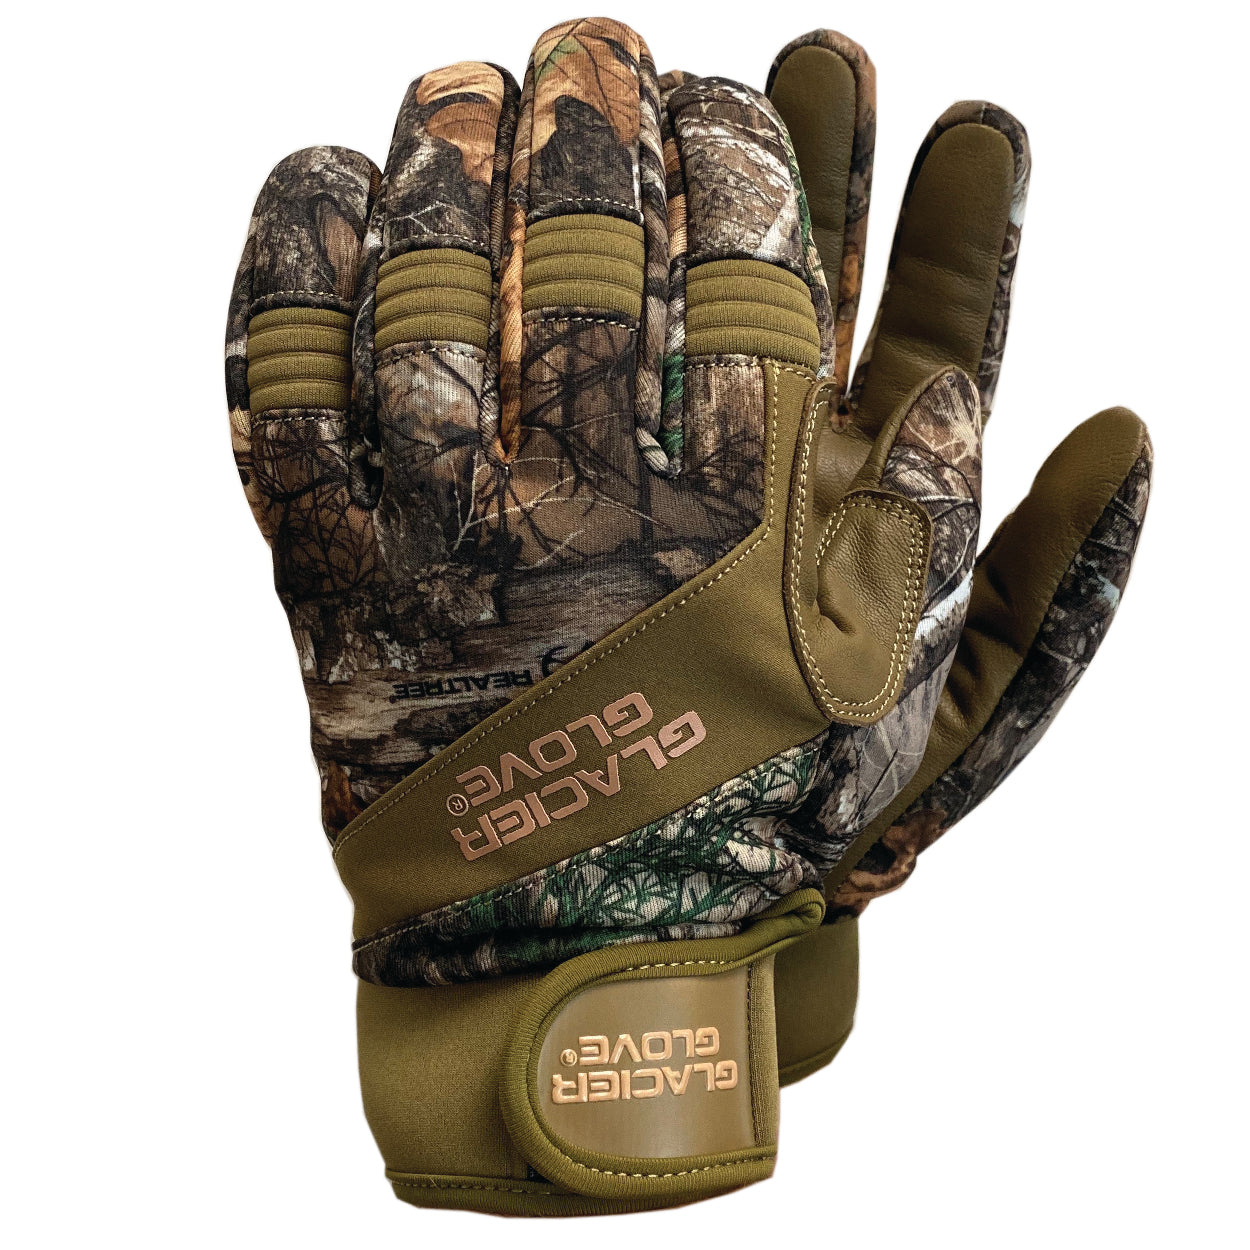 Featuring the Realtree EDGE HD pattern, the Guide Glove is designed with a focus on protection and performance. Its durability and functionality combined with dexterity and comfort makes this glove the perfect choice for rugged outdoor environments.